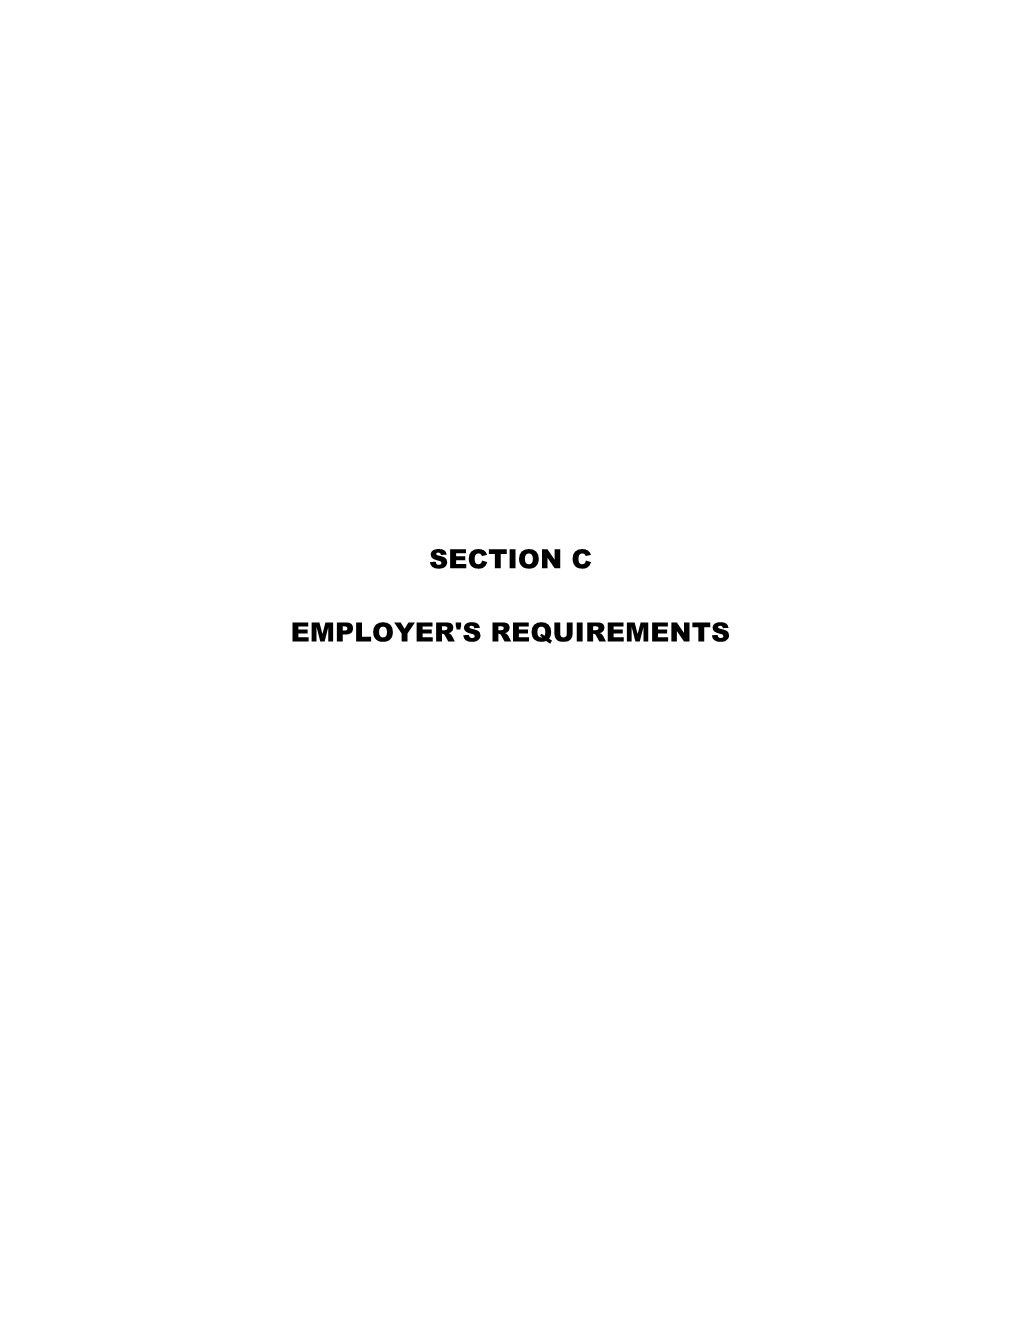 Section C Employer's Requirements